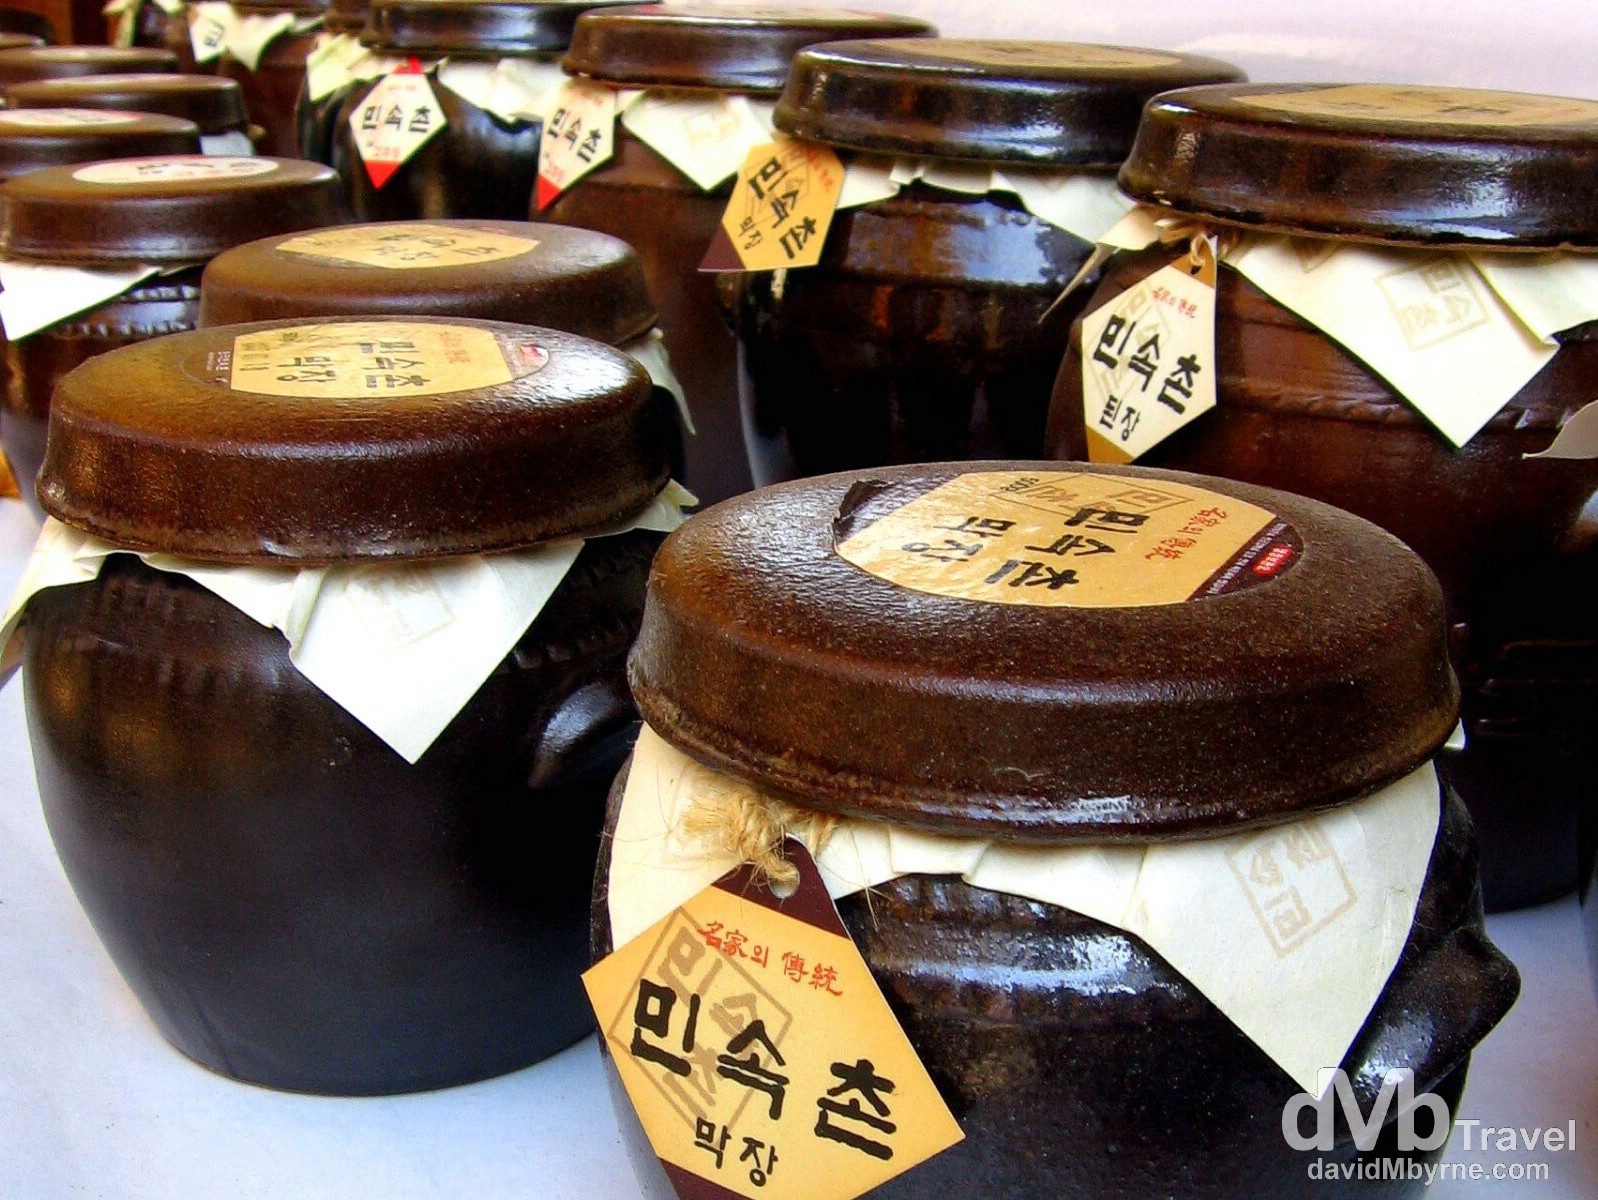 Traditional earthenware jars for sale in the Folk Village in Yongin, South Korea. November 7th, 2007. 